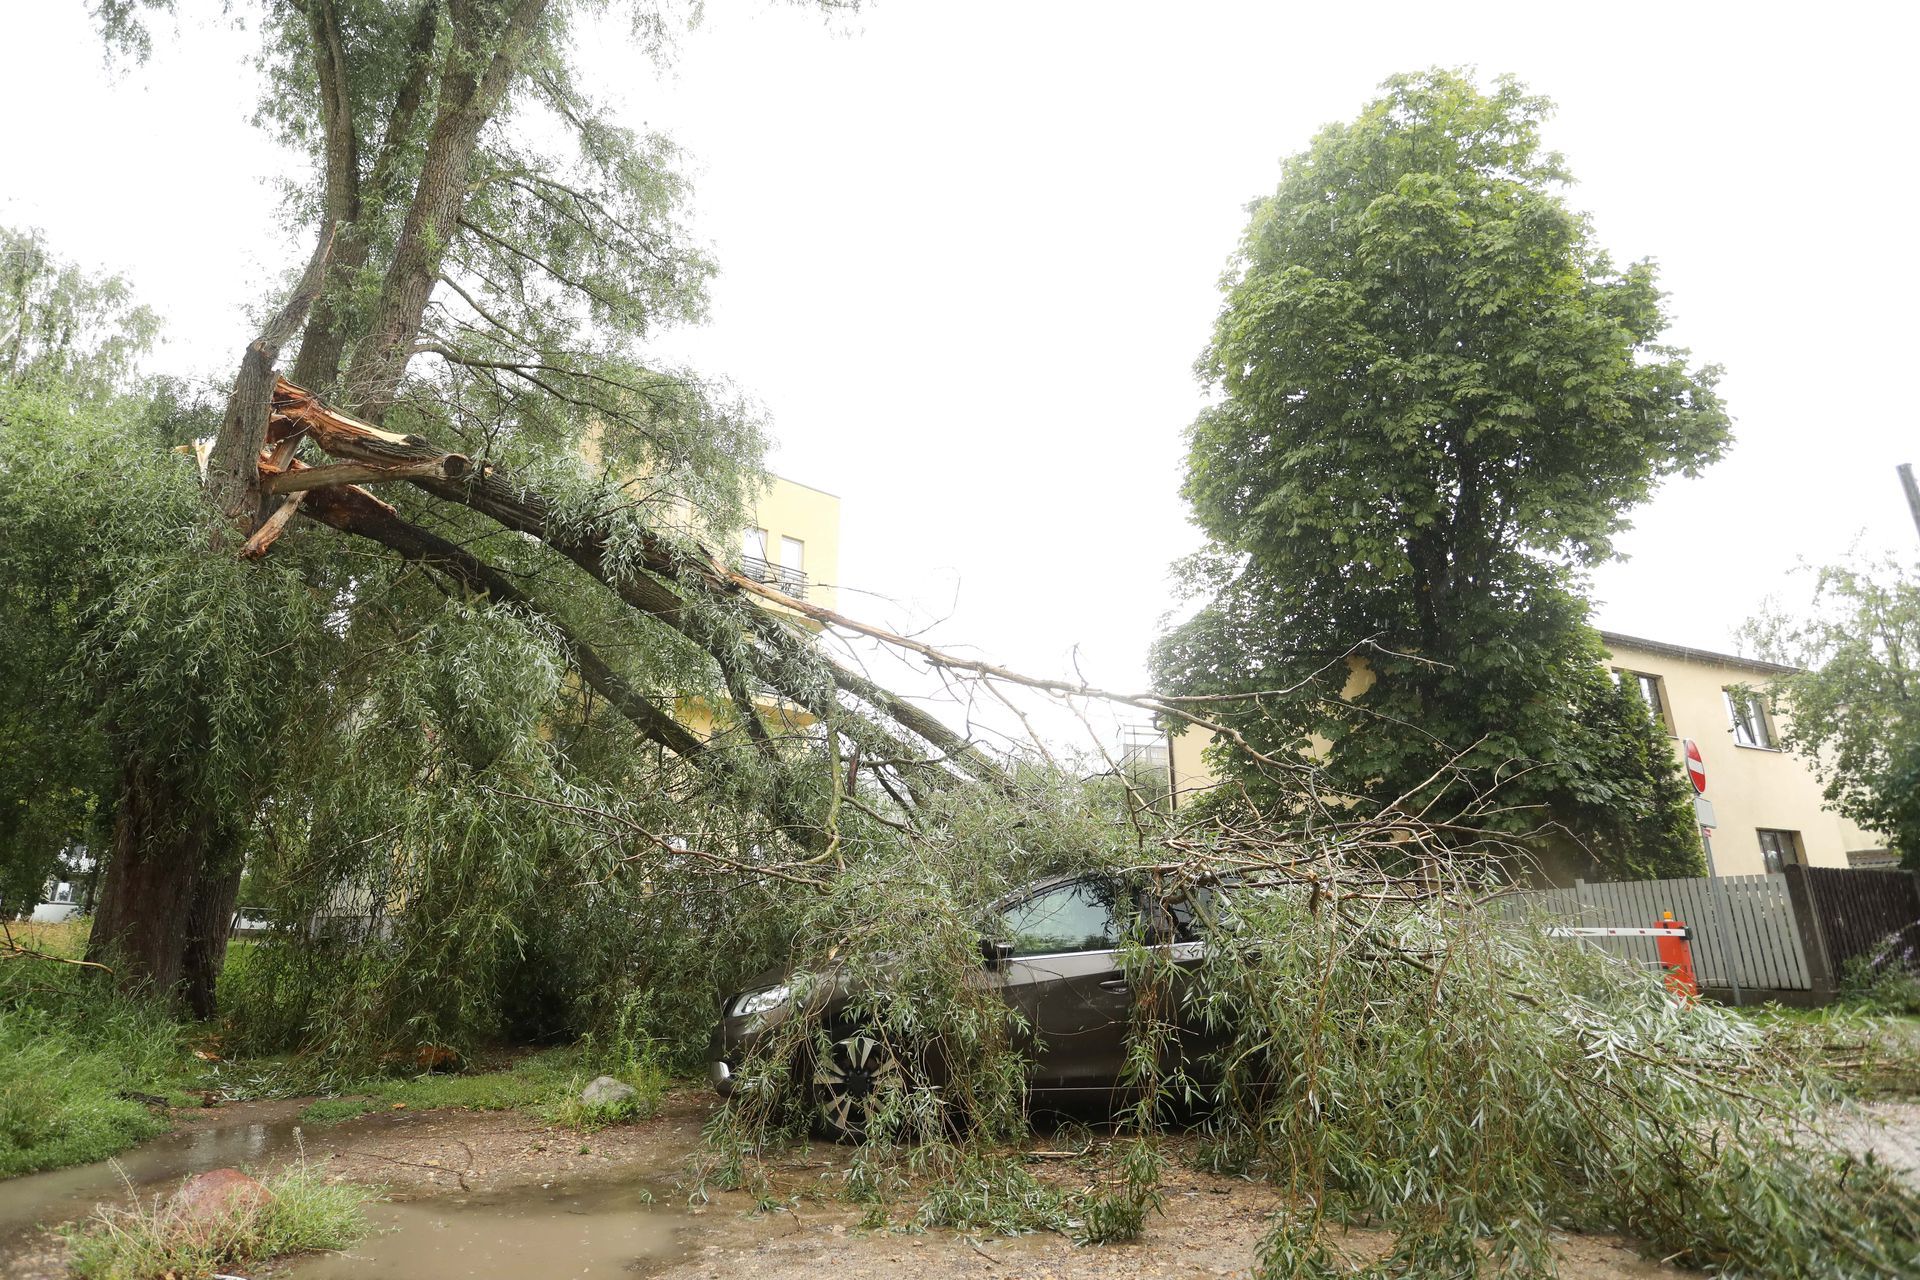 Cables secured to branches could have prevented fall in WacoTX